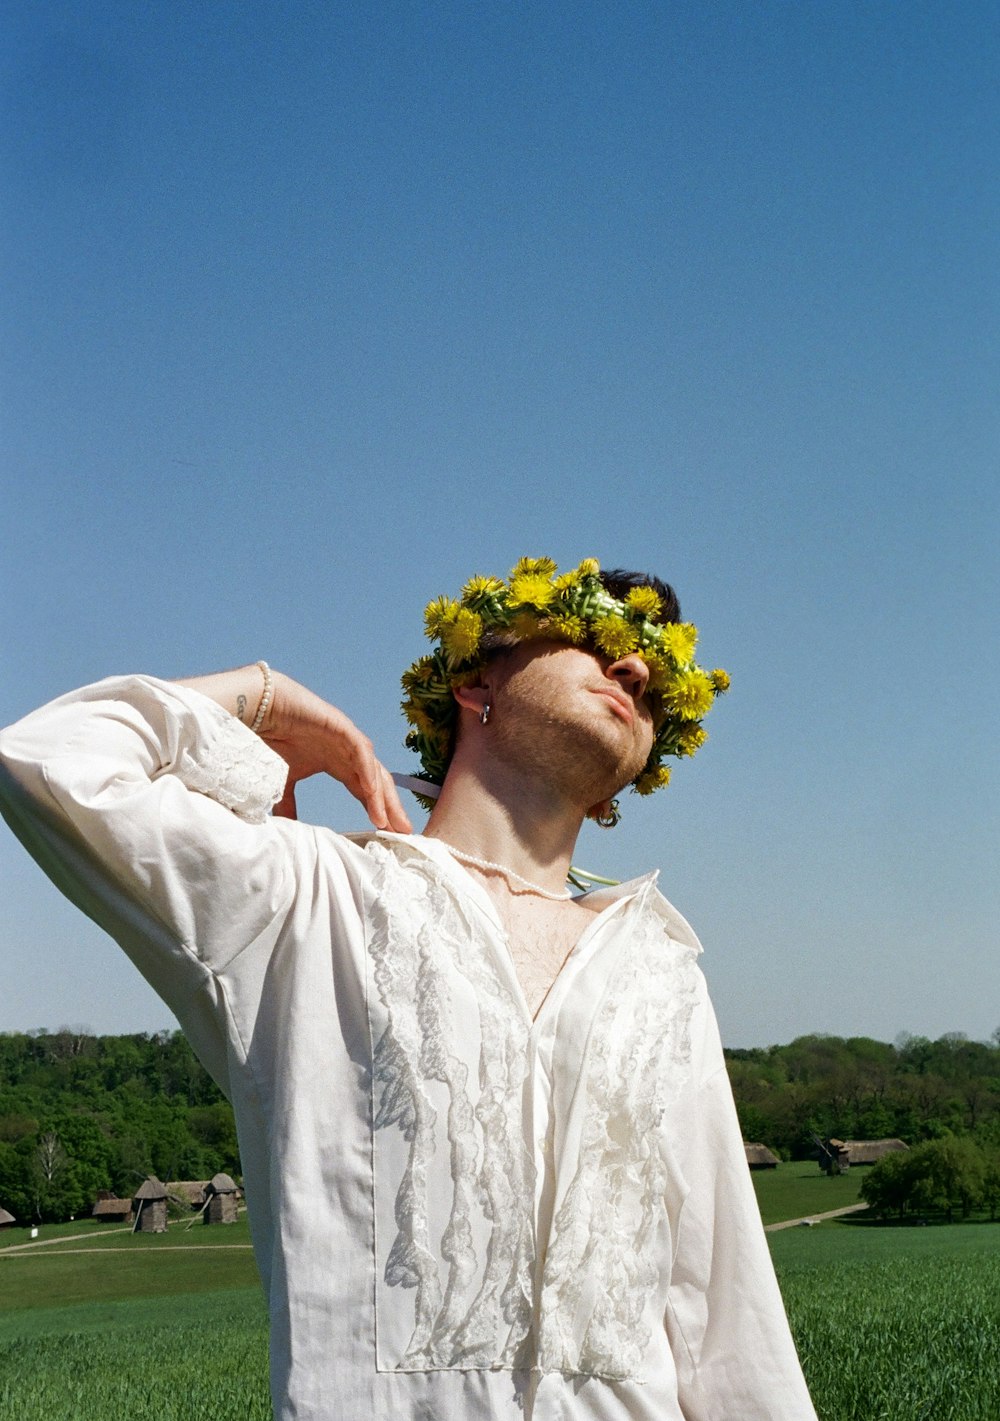 a man with a flower crown on his head